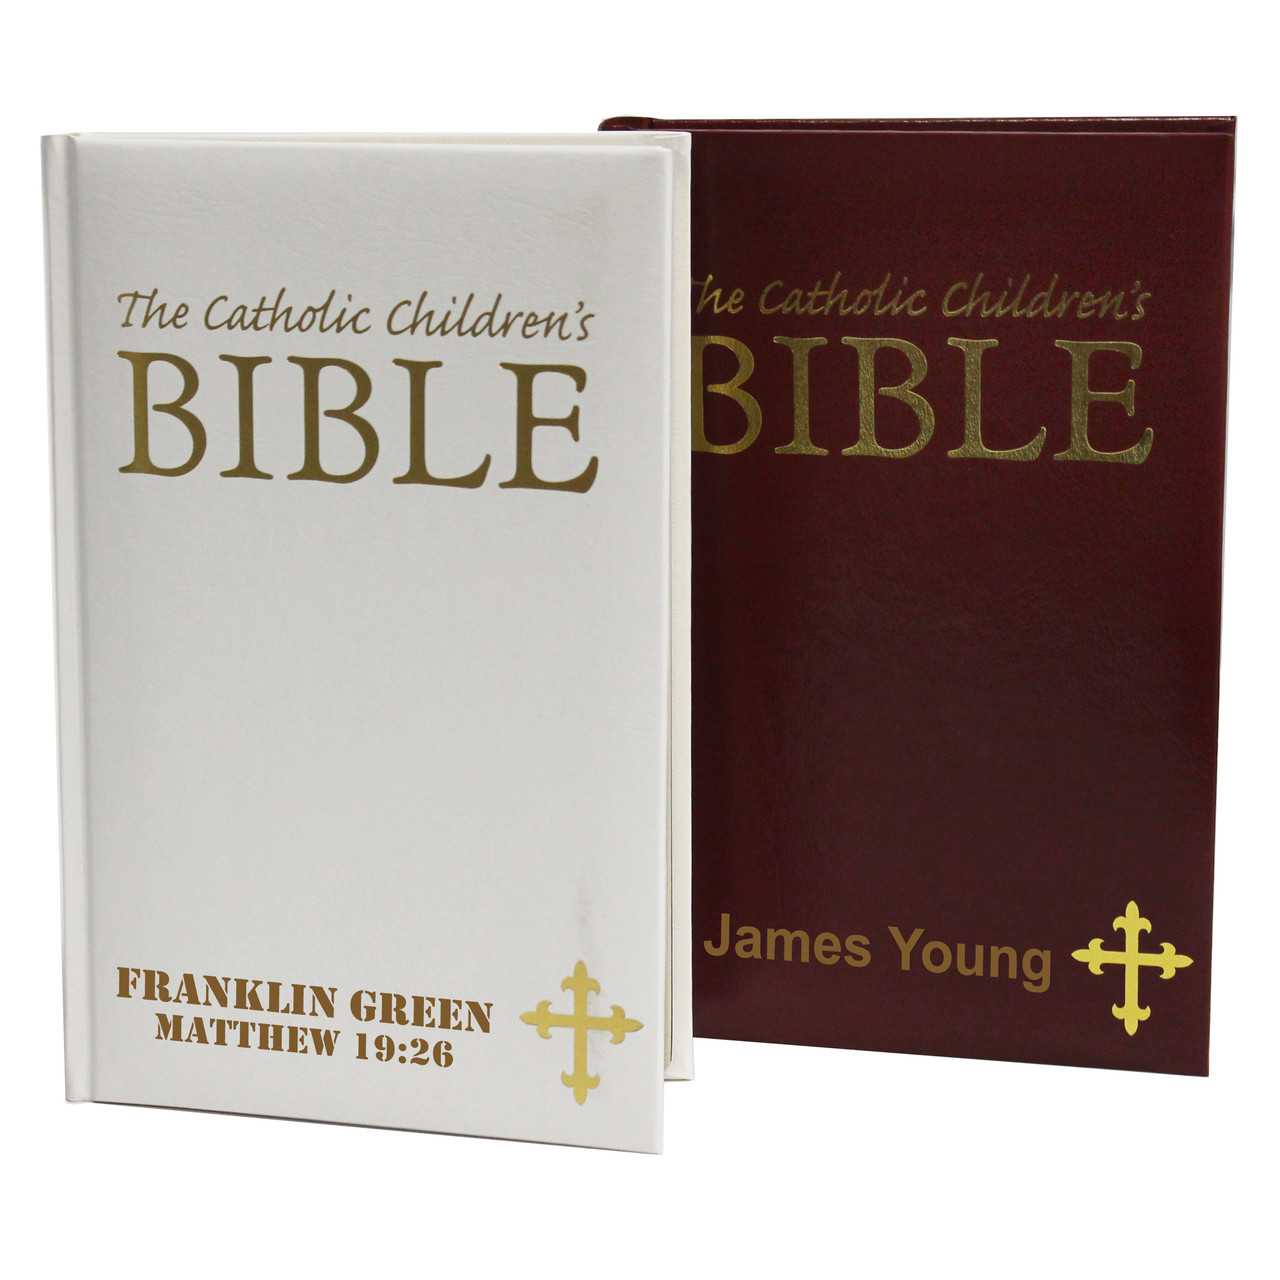 Customize with Name Let's Make Memories Personalized Children's Bible Burgundy Bible for Kids Catholic Bible 9” x 6” New & Old Testament 